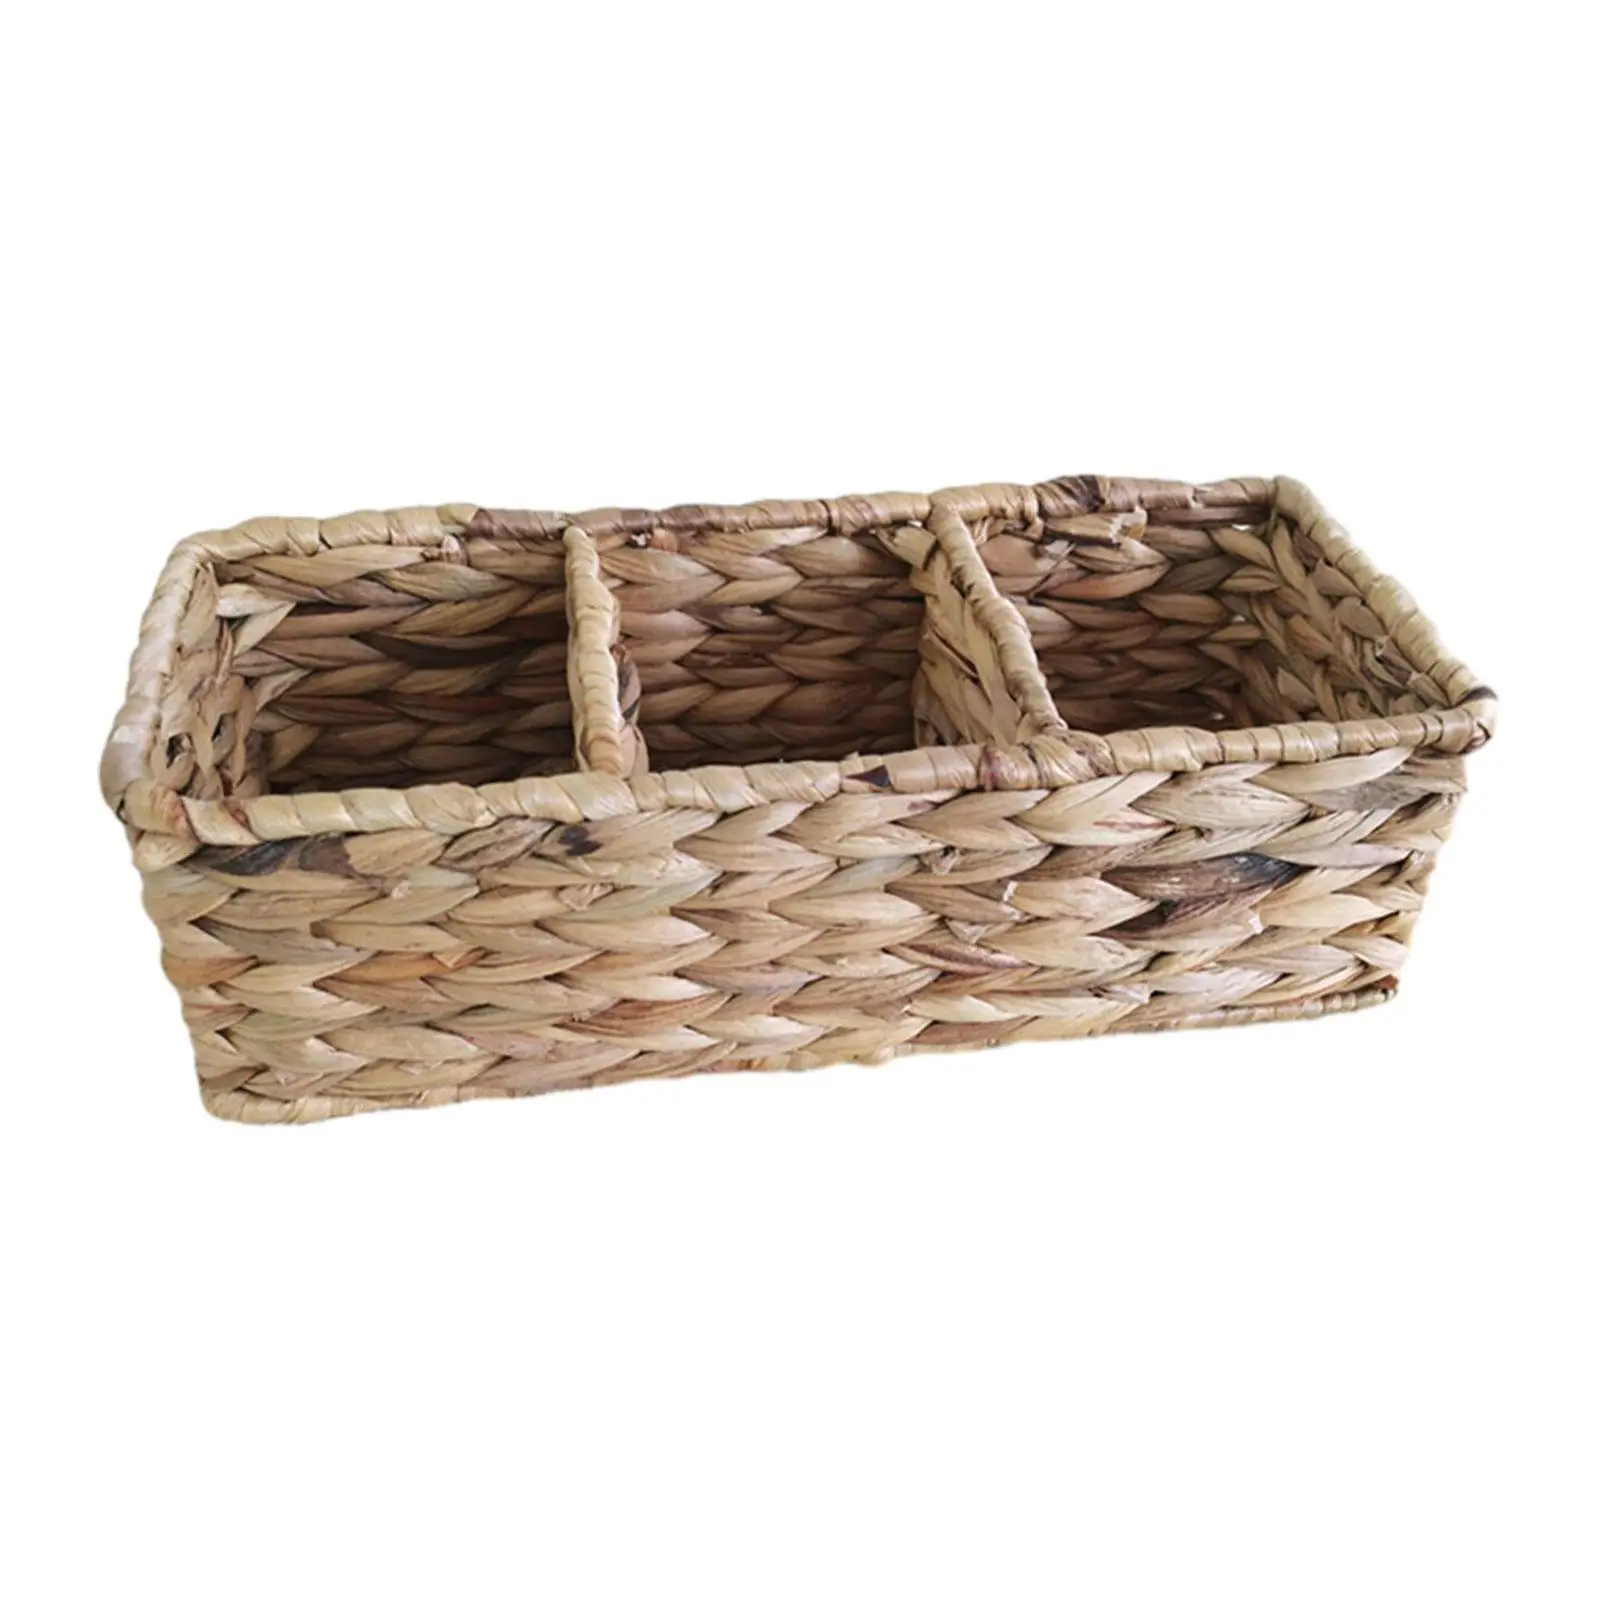 Woven Basket with Compartments Portable Countertop Desktop Lightweight Sundries Basket for Home Farmhouse Cafe Hotel Home Decor